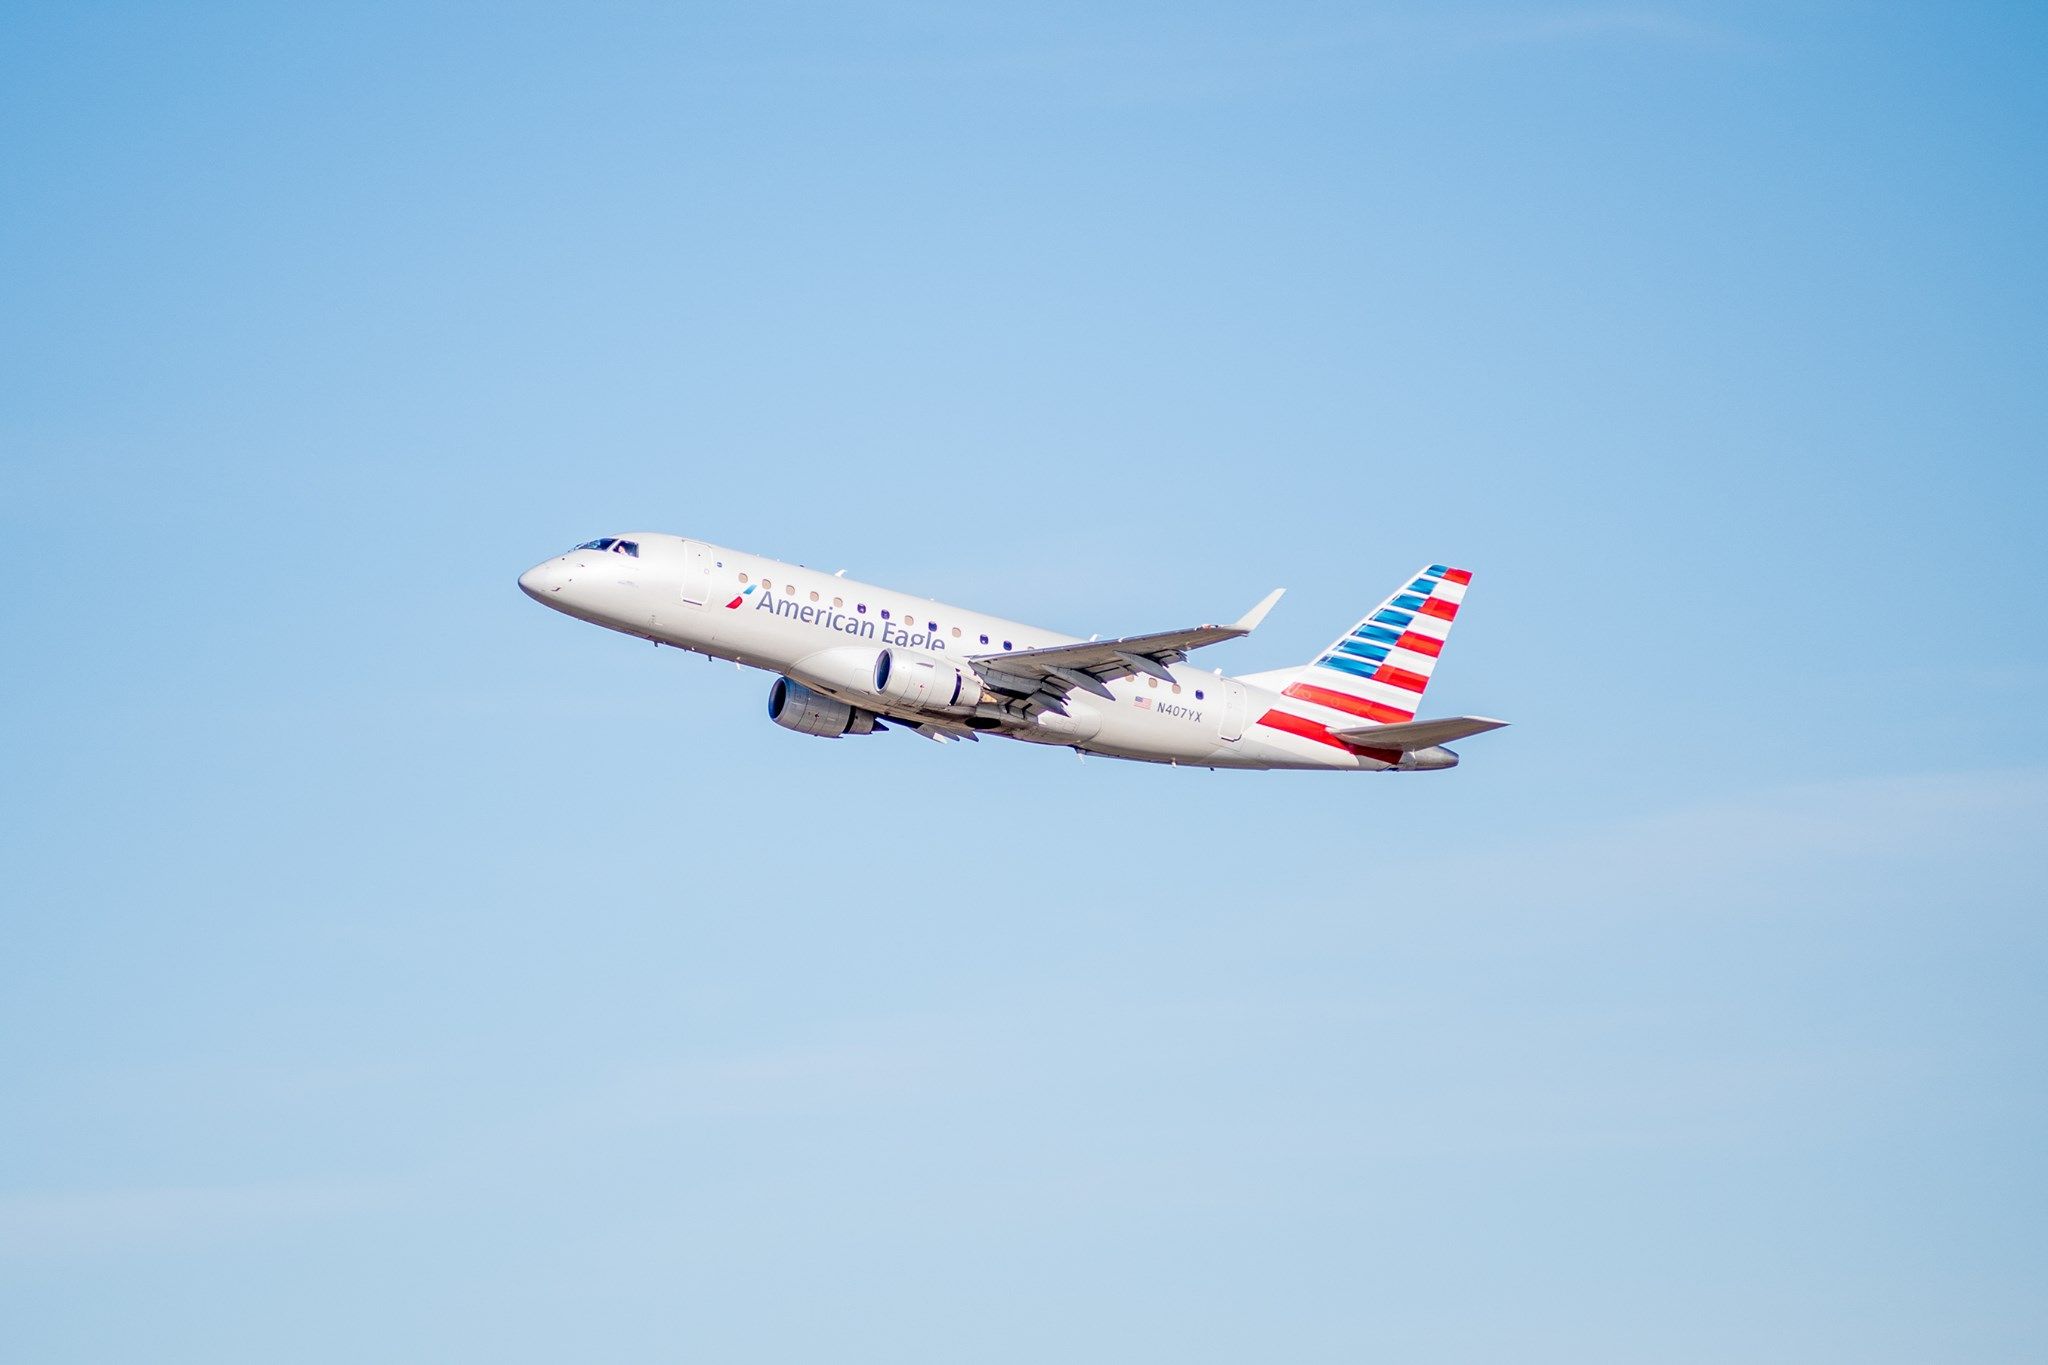 American Eagle Embraer E175 (Republic Airways) N407YX taking off from Raleigh-Durham International Airport.